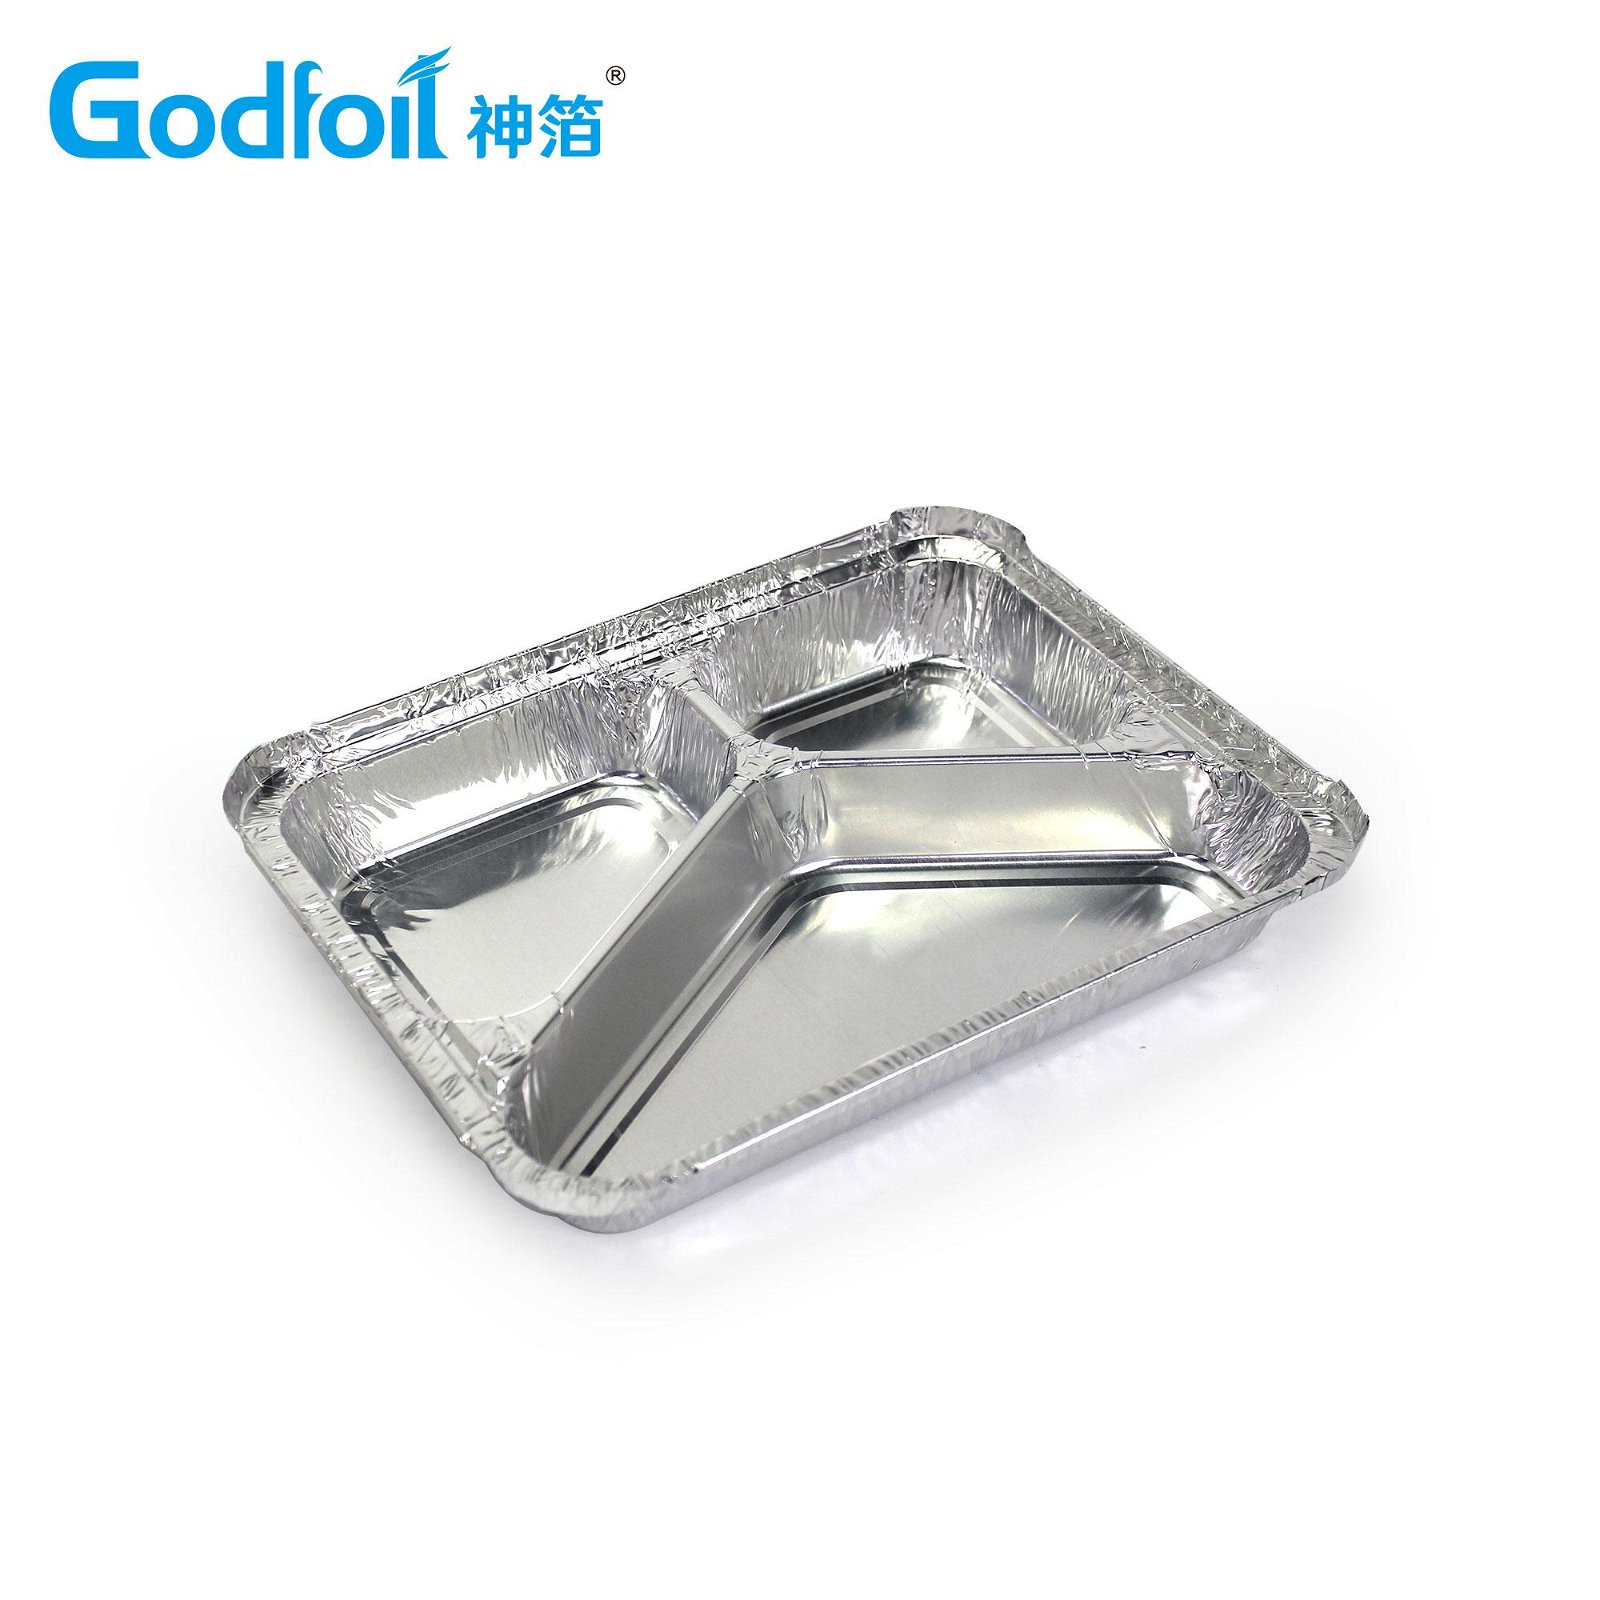 Y-Three Compartment Container Mould For Indian Market